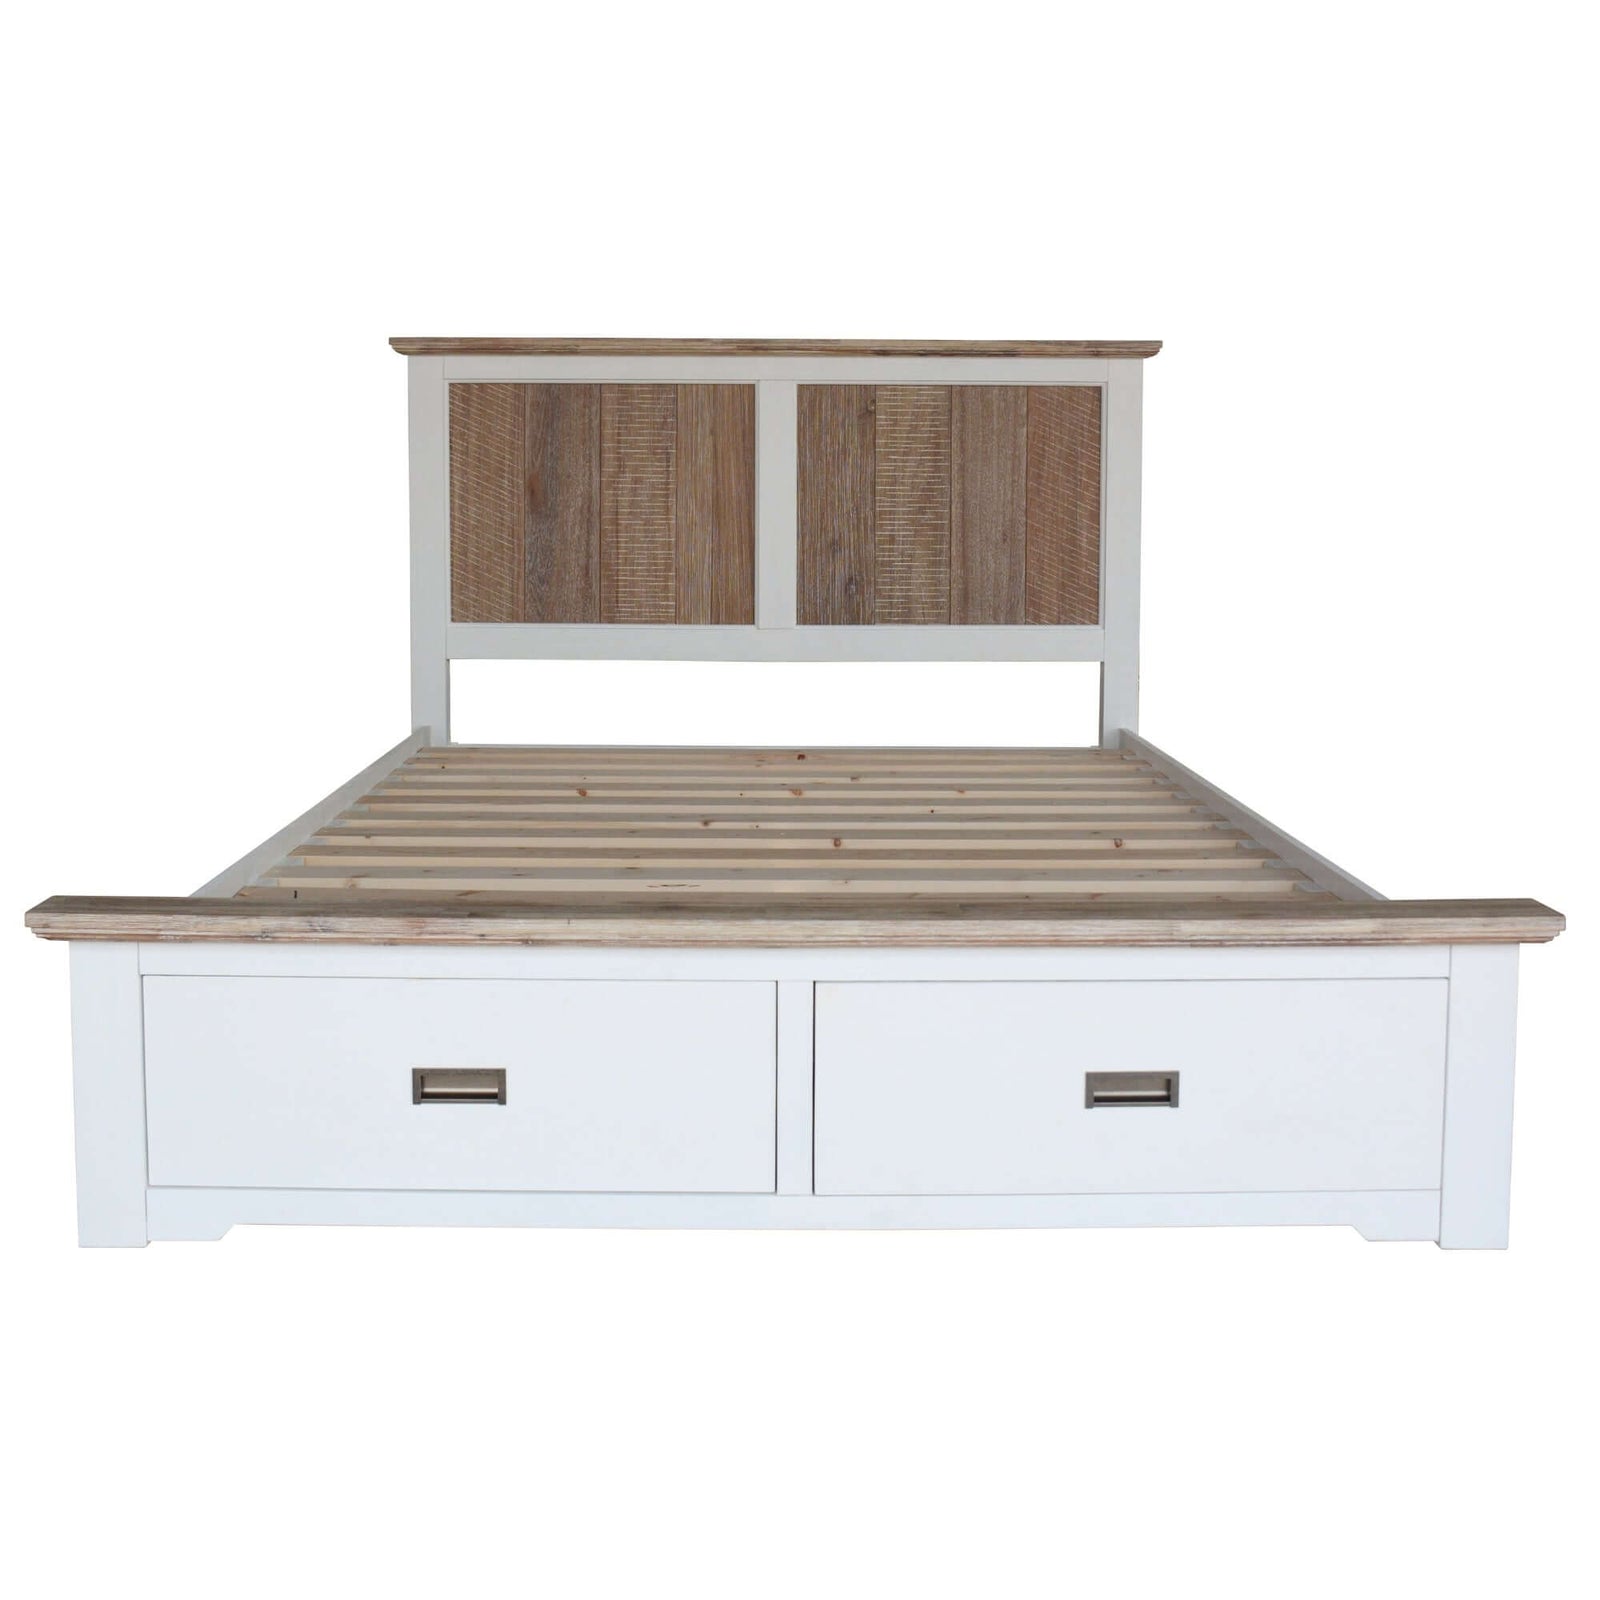 Fiona Bed Frame King Size Timber Mattress Base With Storage Drawers White Grey-Upinteriors